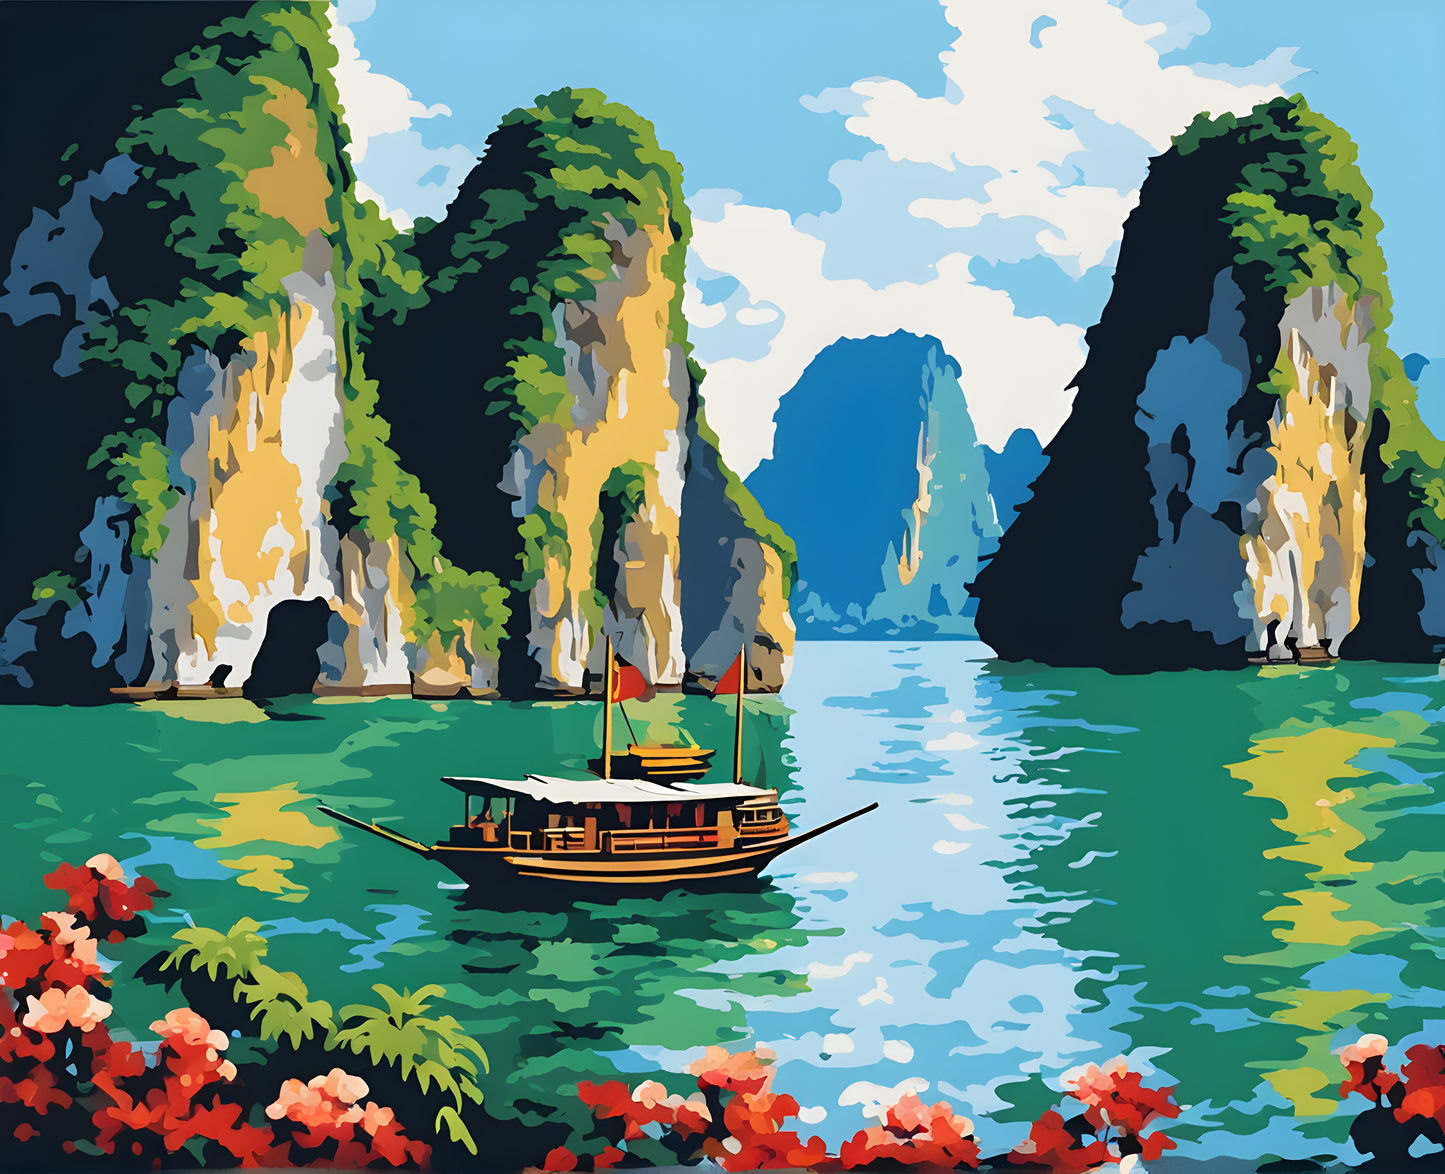 Amazing Places OD (95) - Halong Bay, Vietnam - Van-Go Paint-By-Number Kit